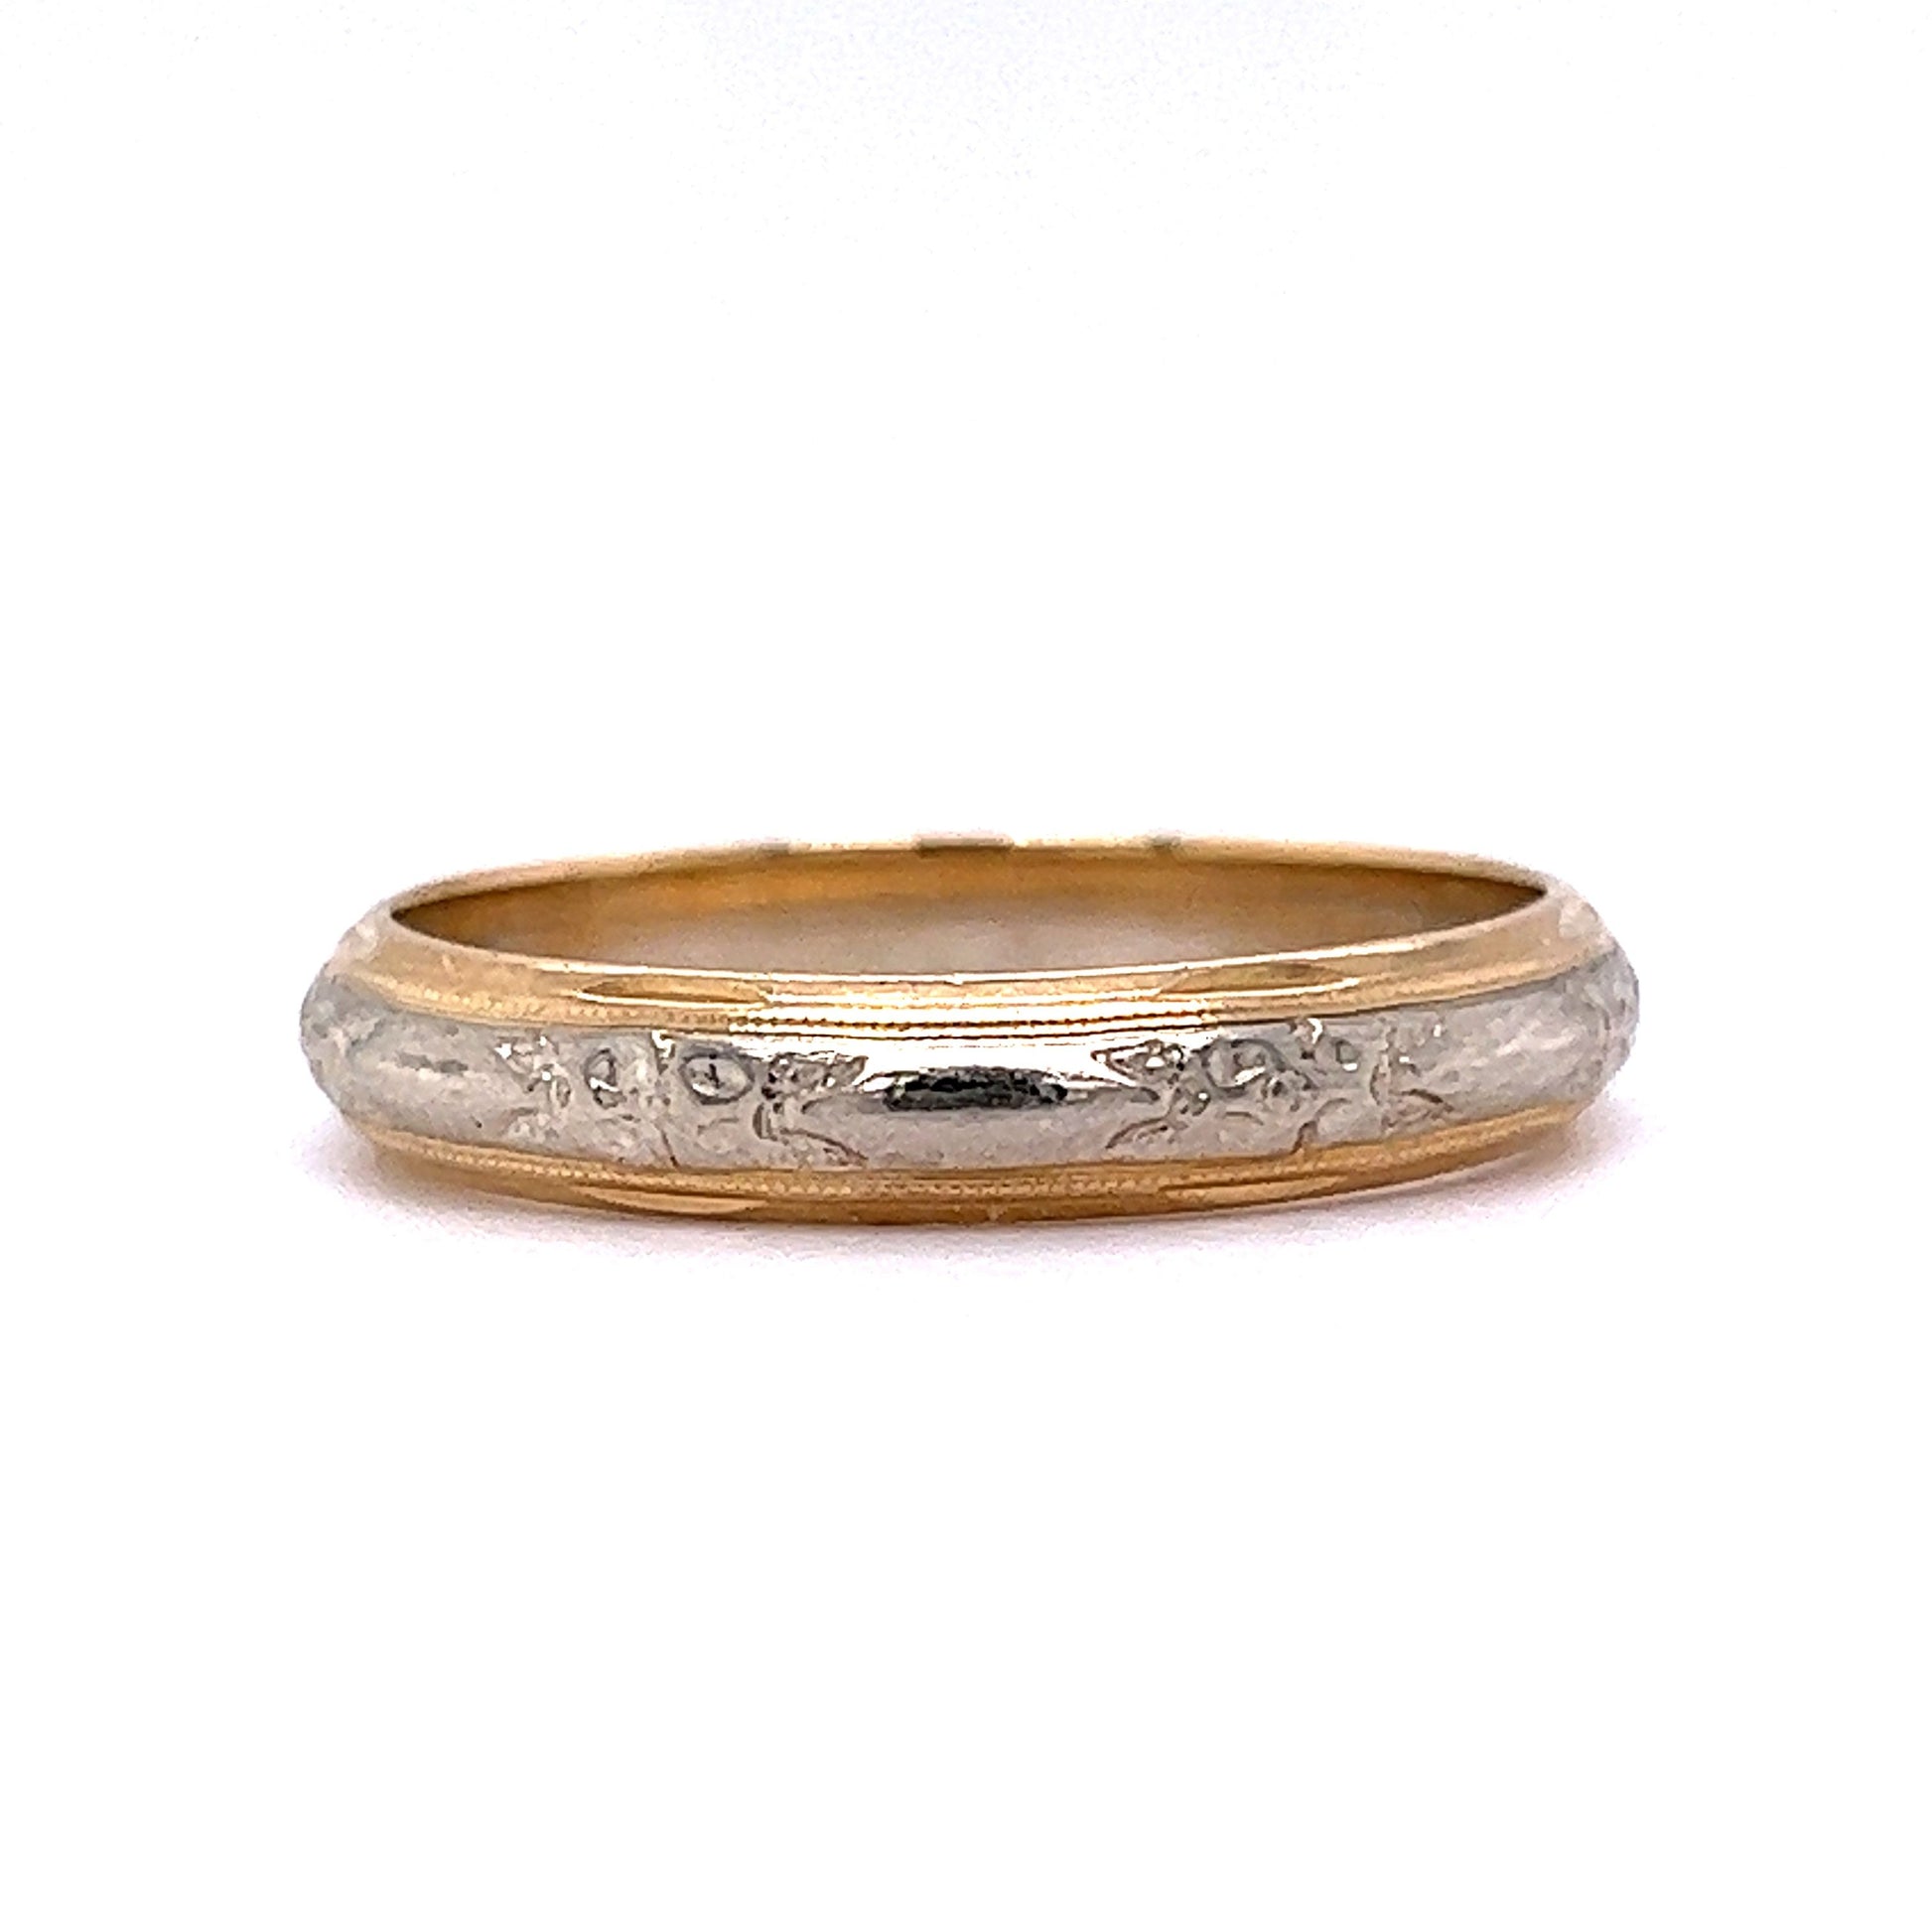 Men's Retro Two-Tone Engraved Wedding Band in 14k Gold